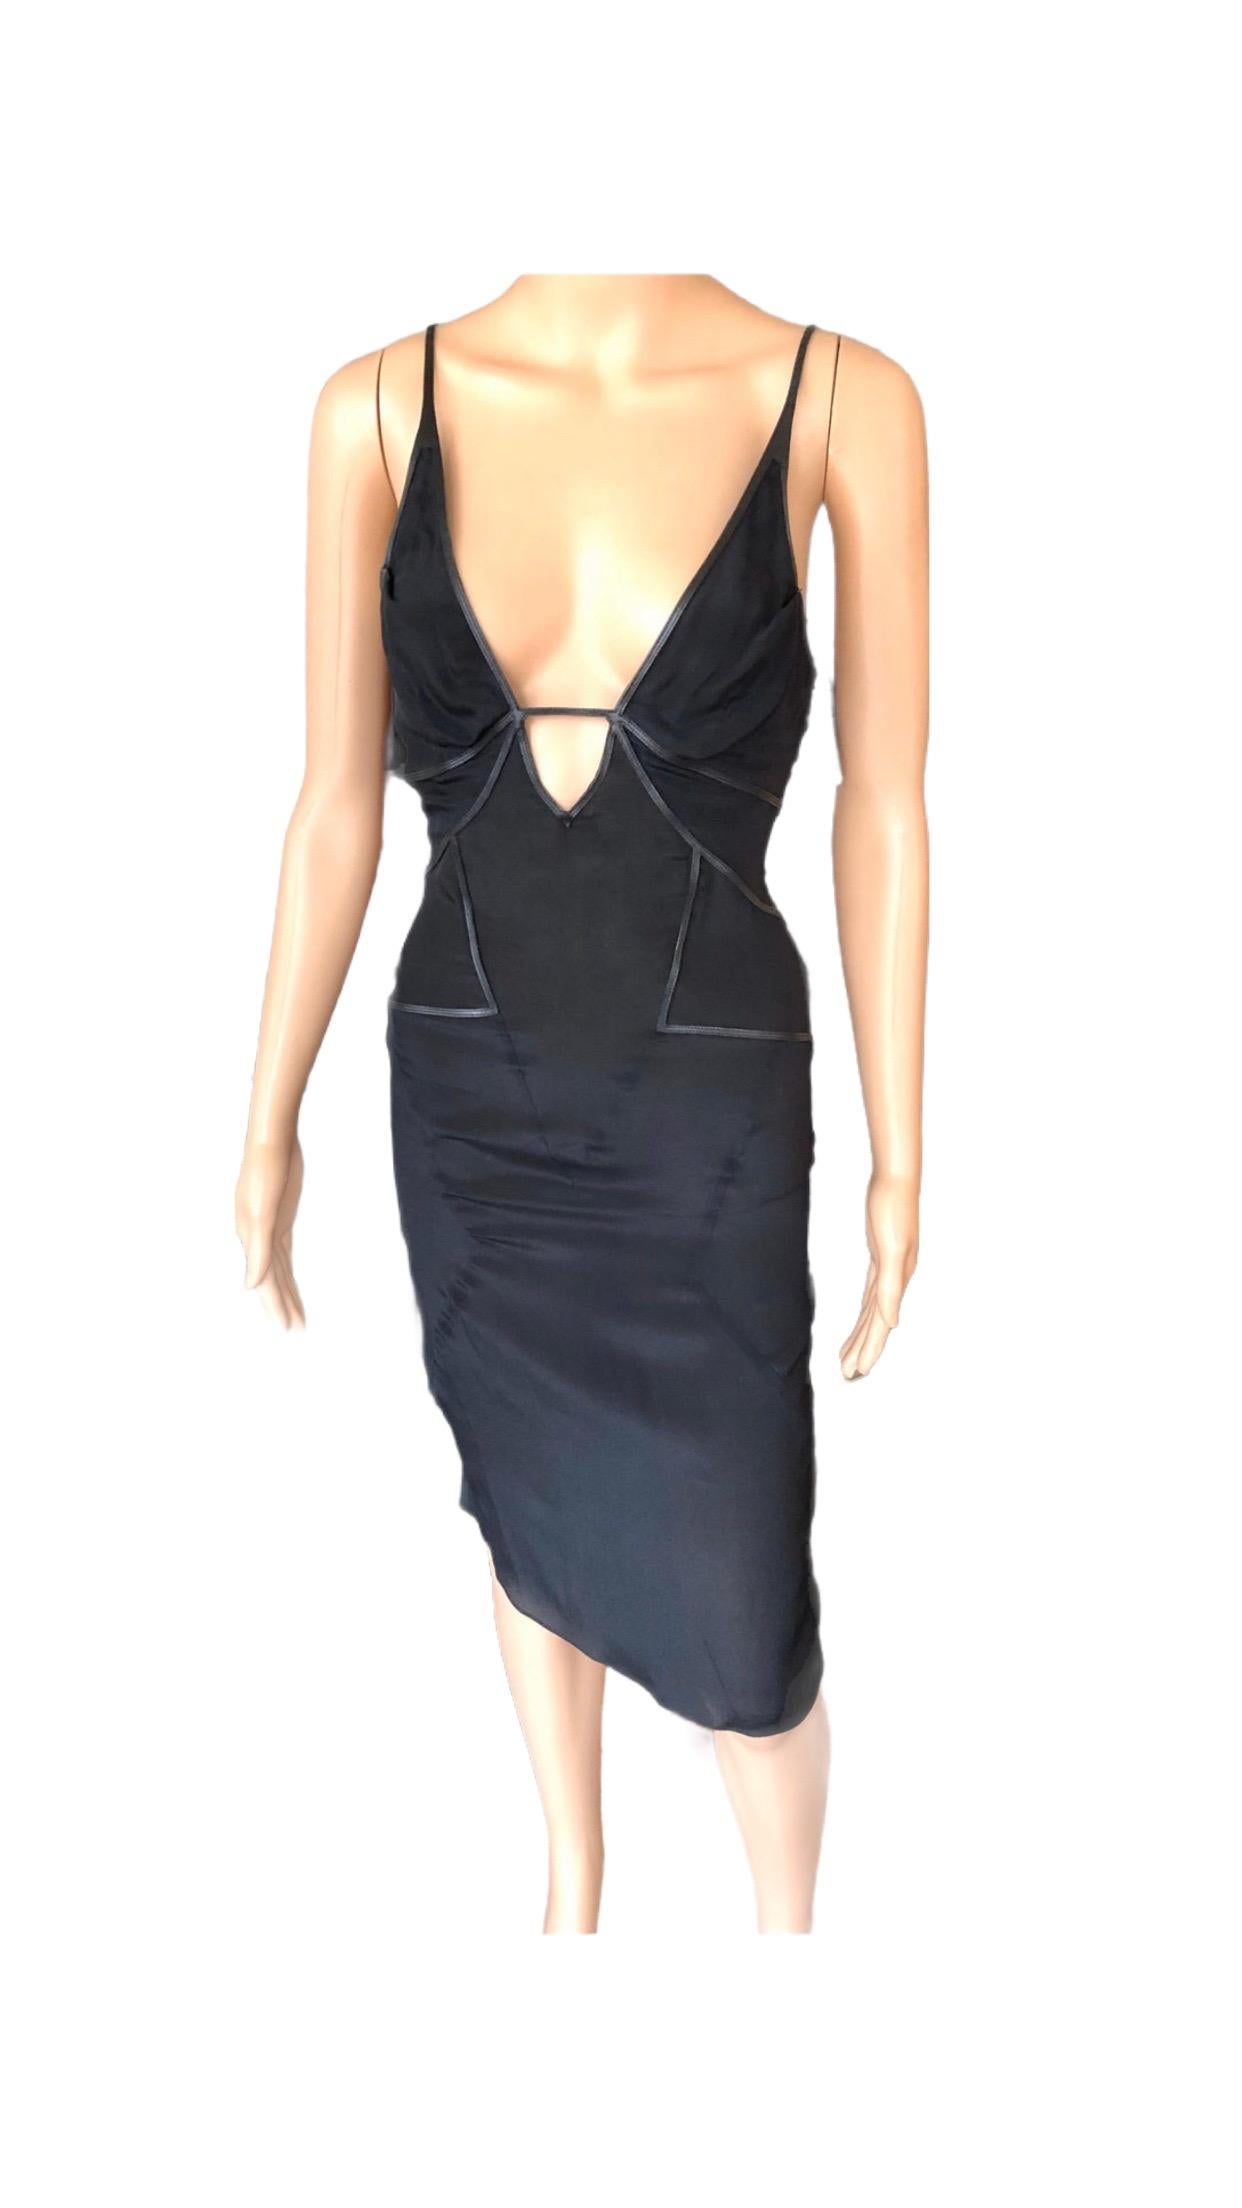 Gucci by Tom Ford S/S 2004 Cutout Plunged Neckline Black Dress For Sale 4